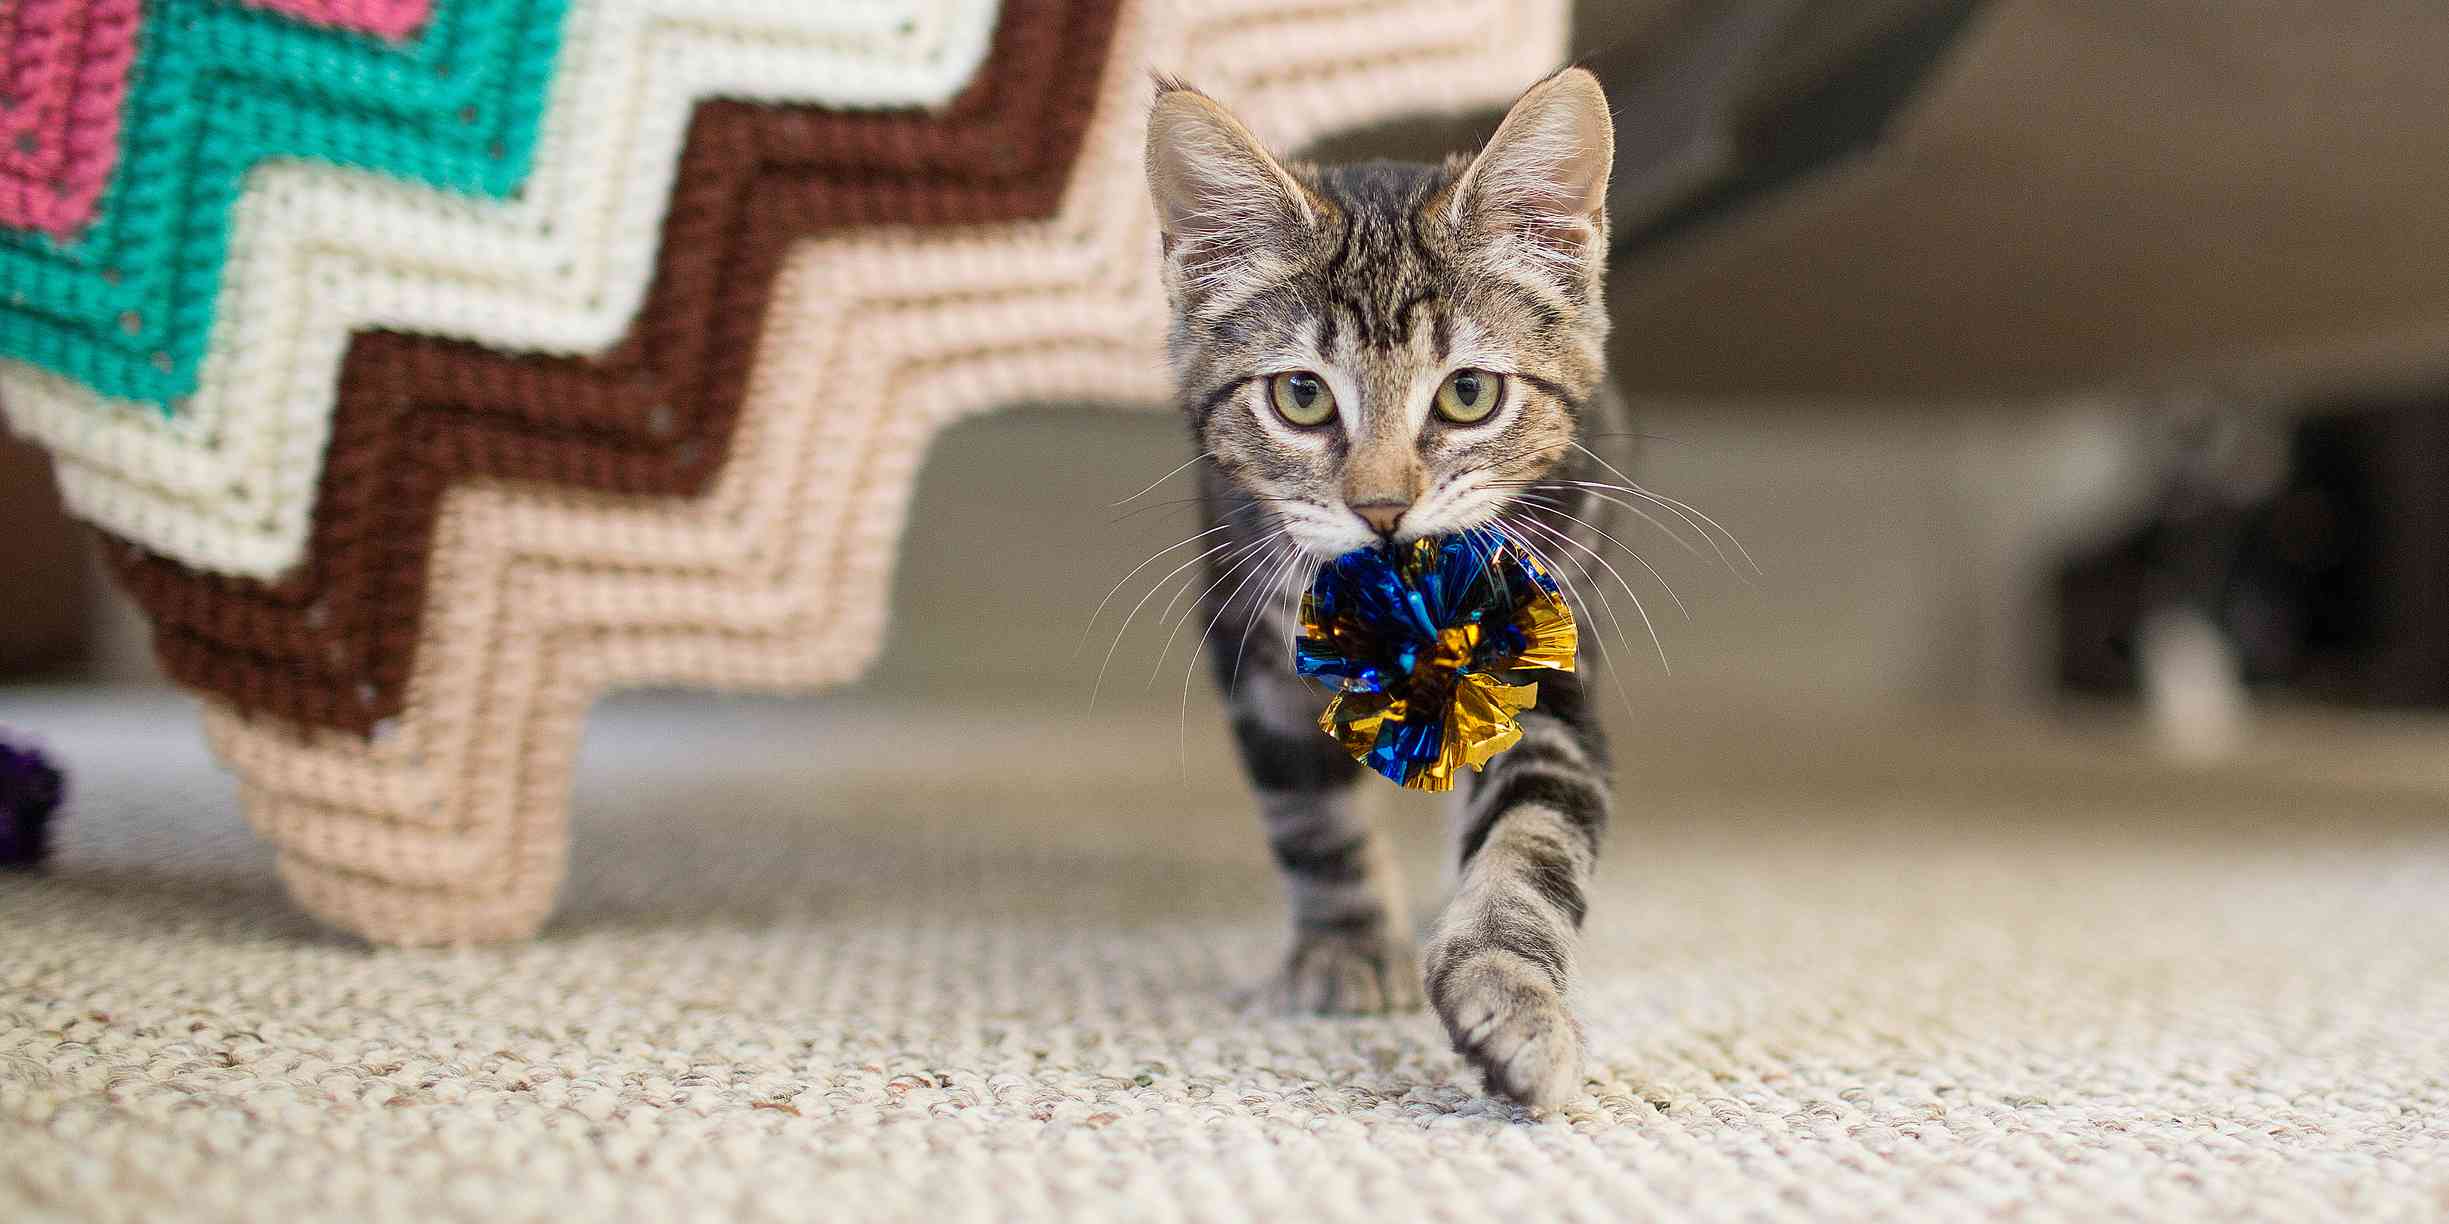 Tabby cat carrying a toy.